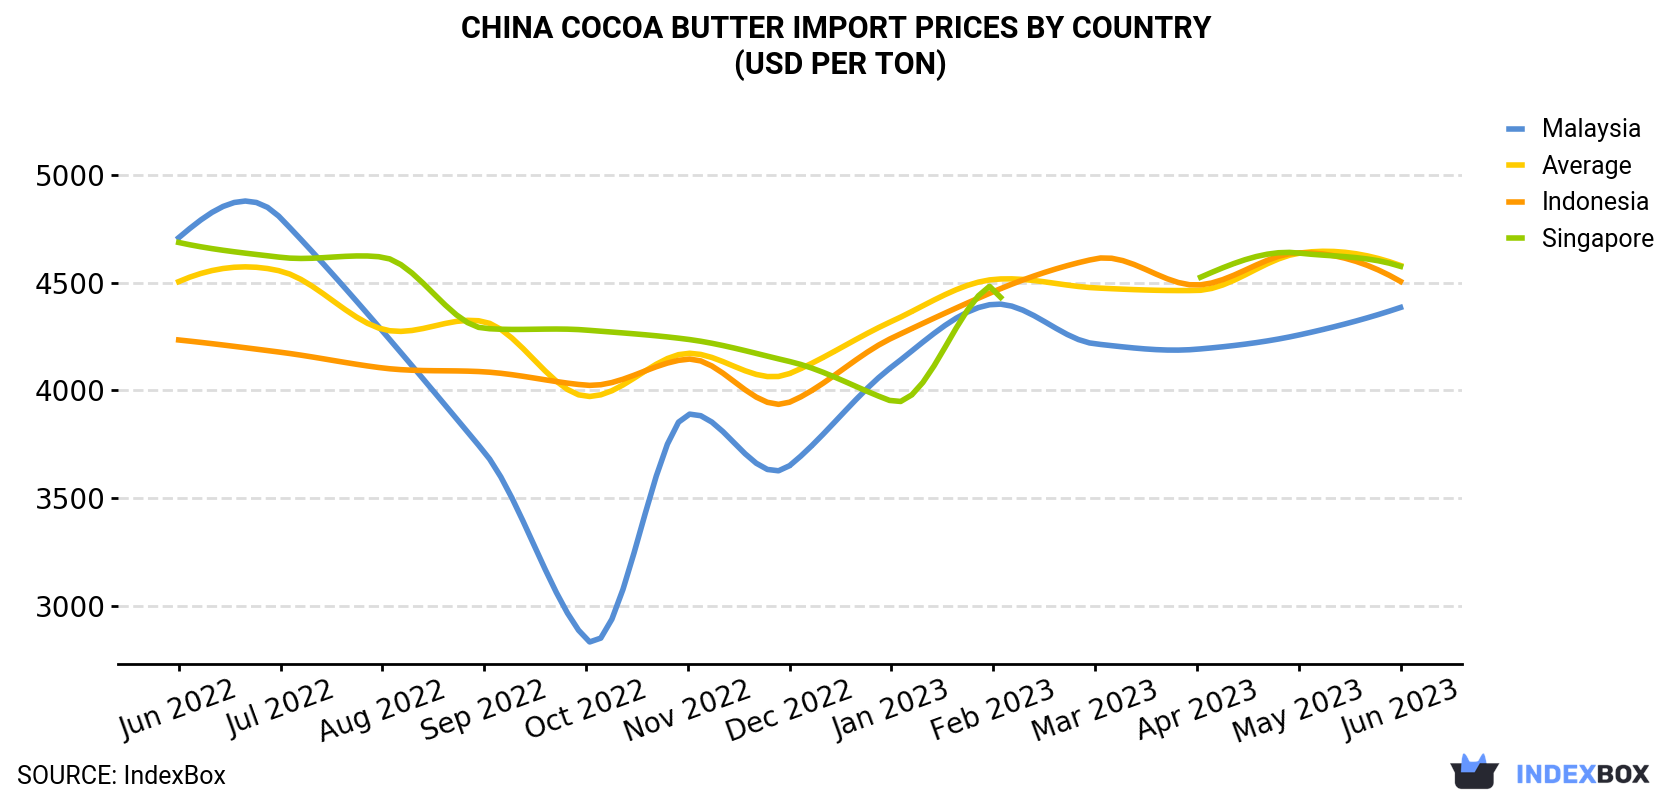 China Cocoa Butter Import Prices By Country (USD Per Ton)